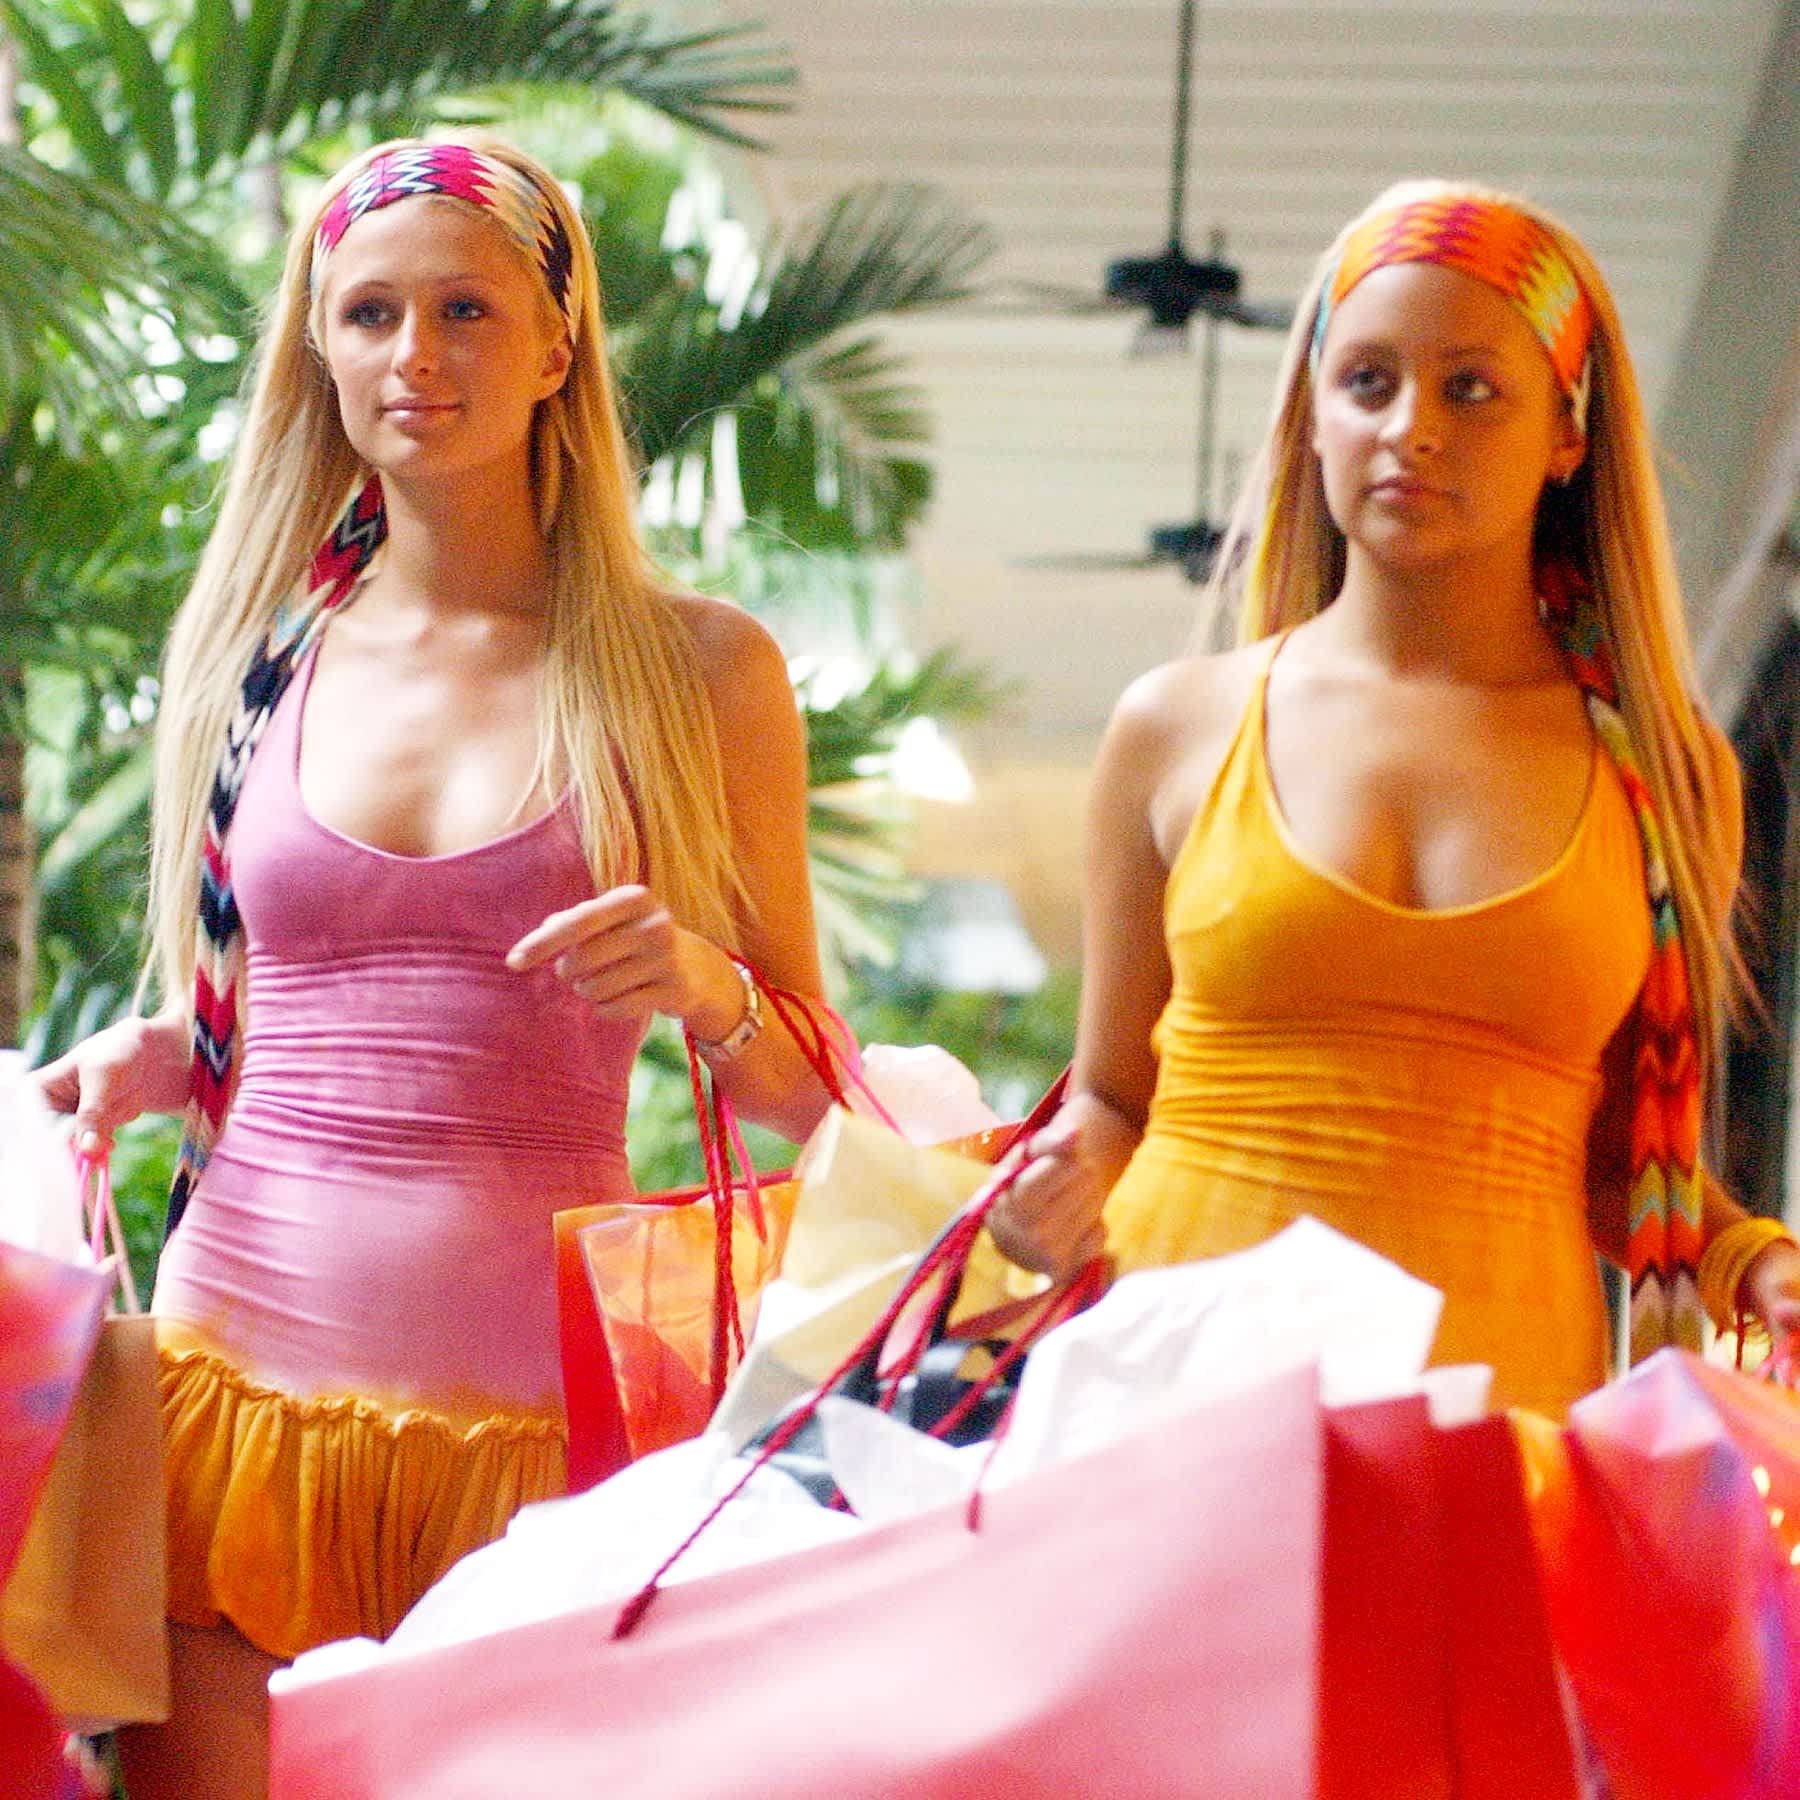 Paris Hilton And Nicole Richie S Outfits From The Simple Life Will Have You Saying That S Hot